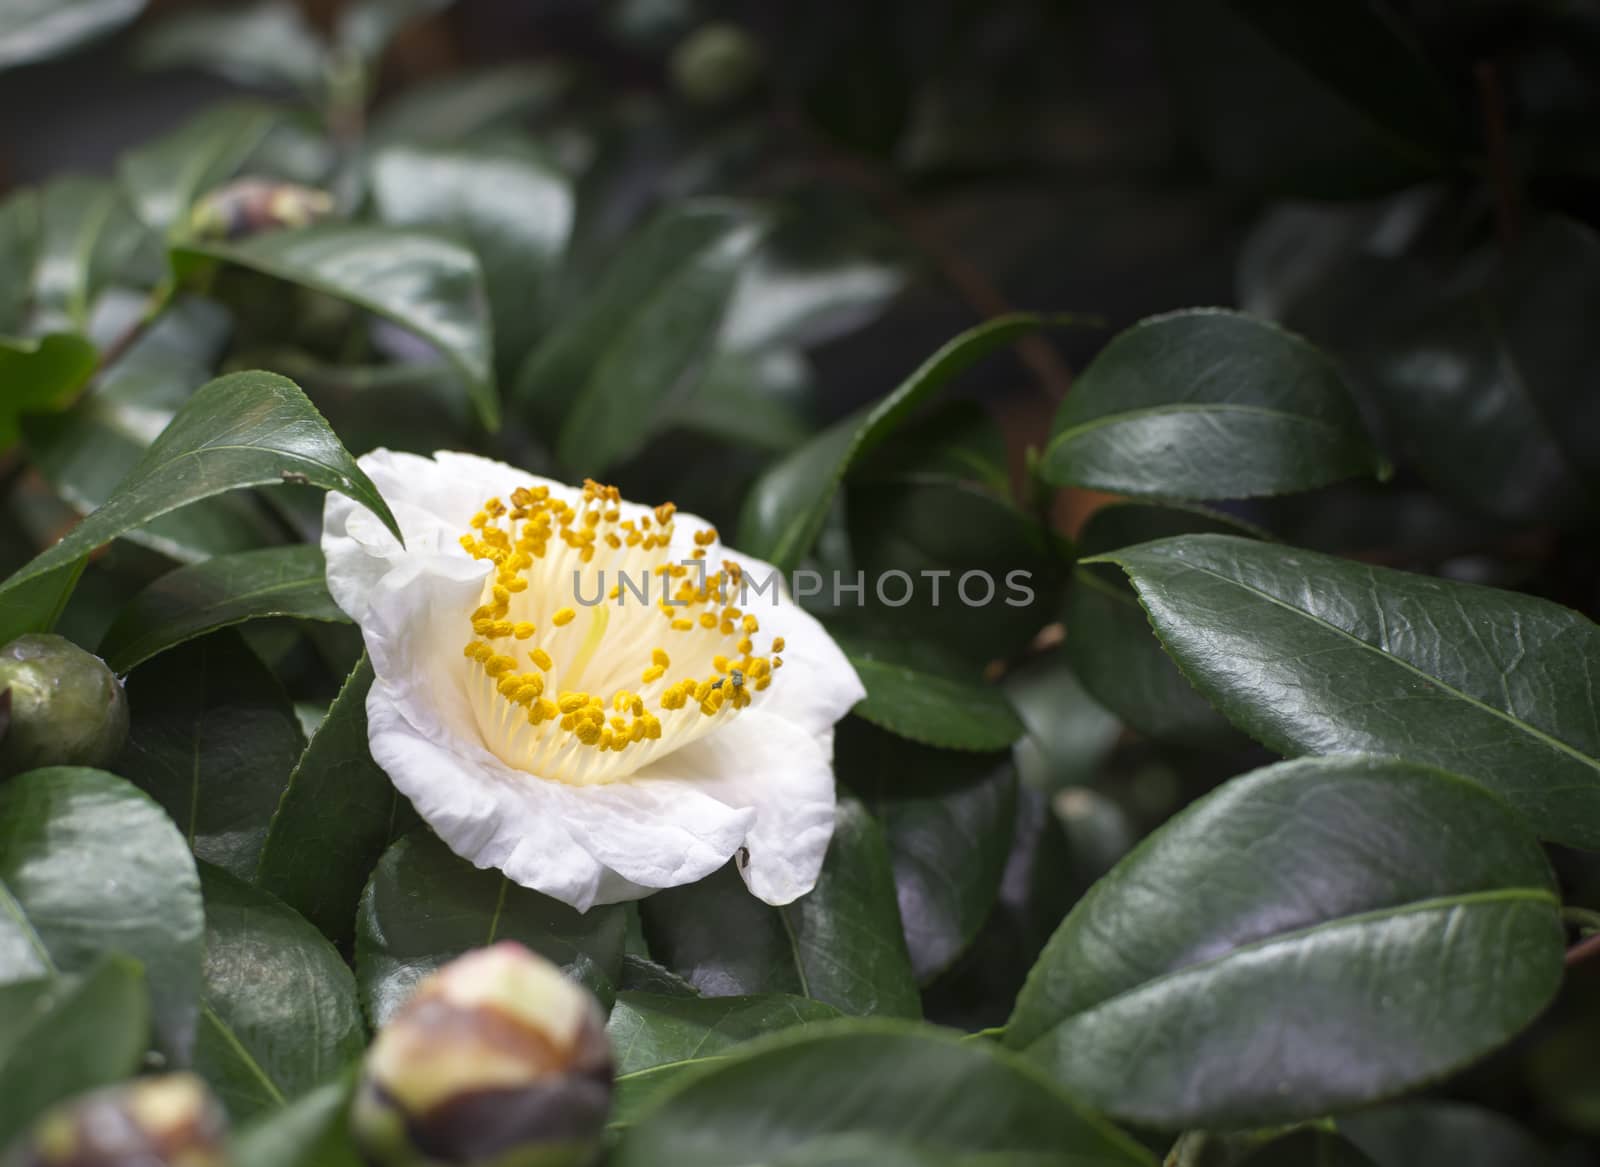 White Camellia Flower and buds in green foliage.